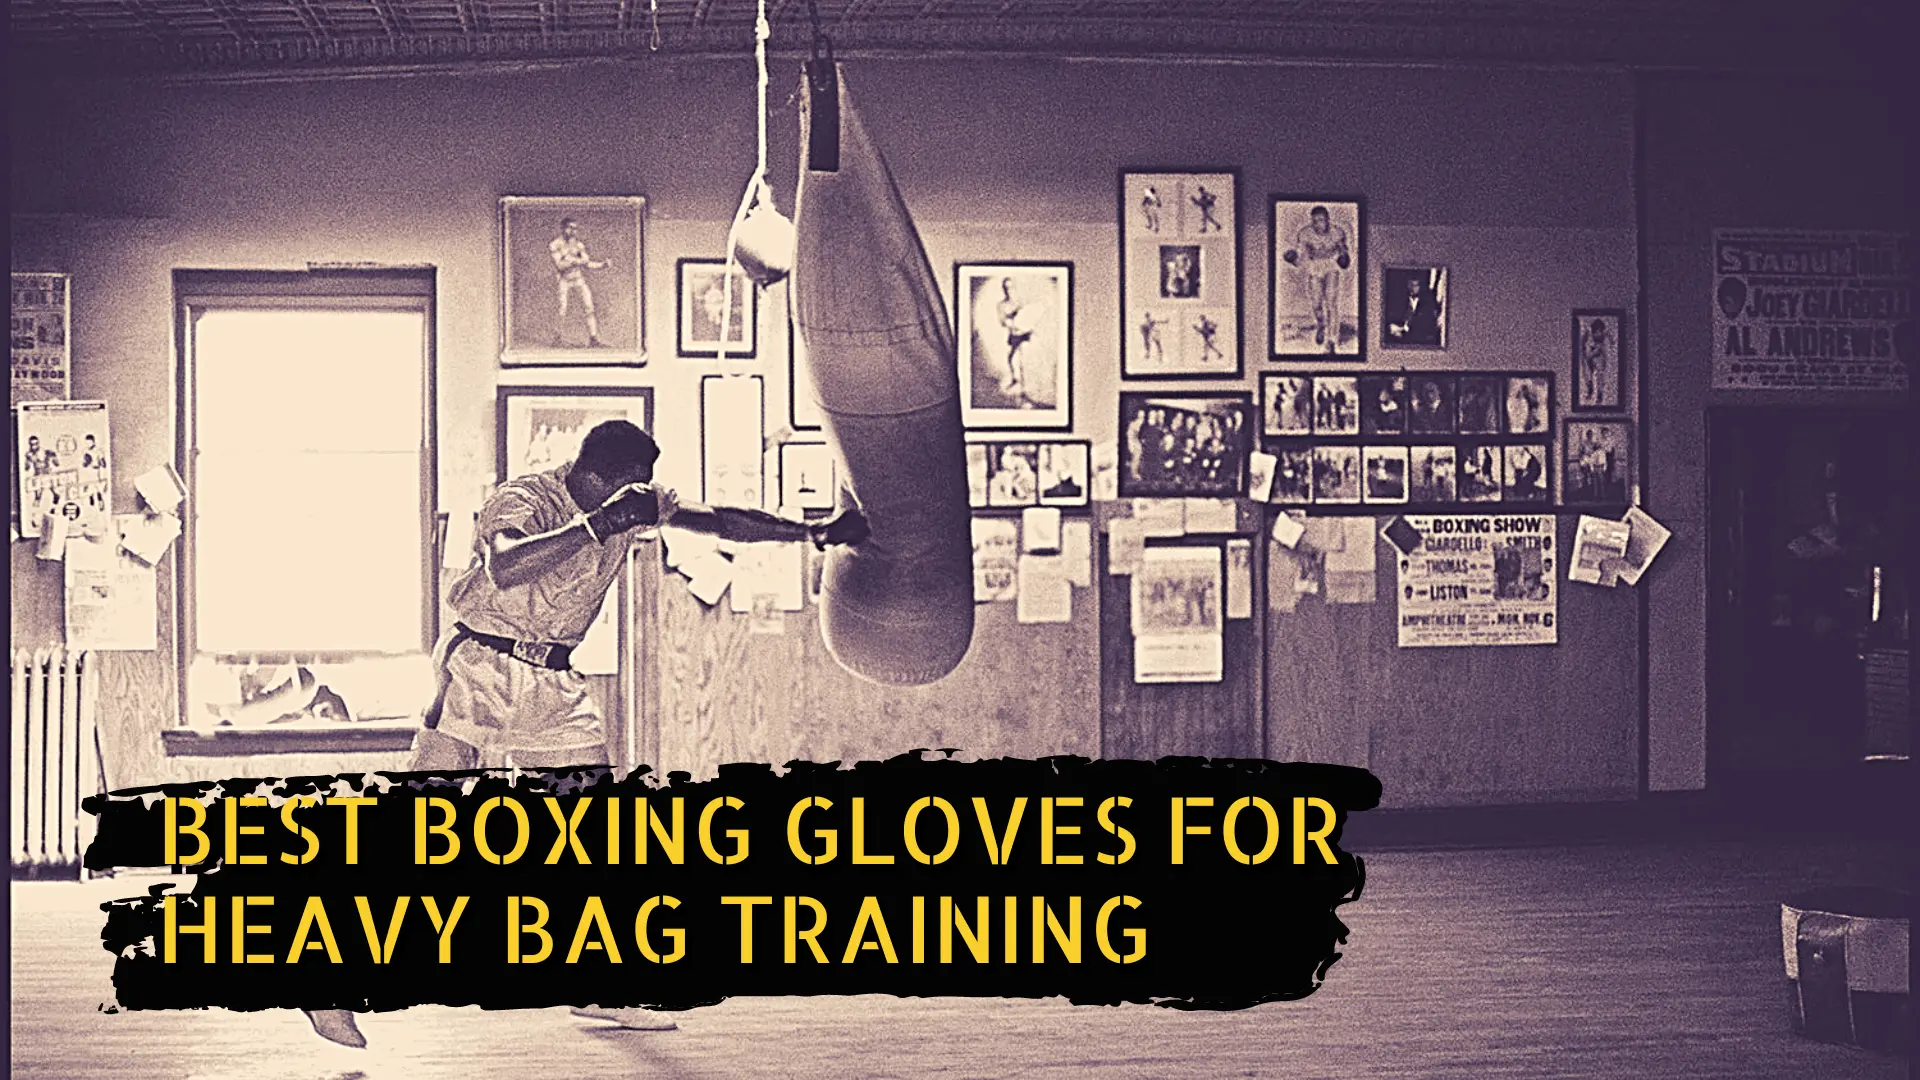 Mohammad Ali training and the title "Best boxing gloves for heavy bag training"